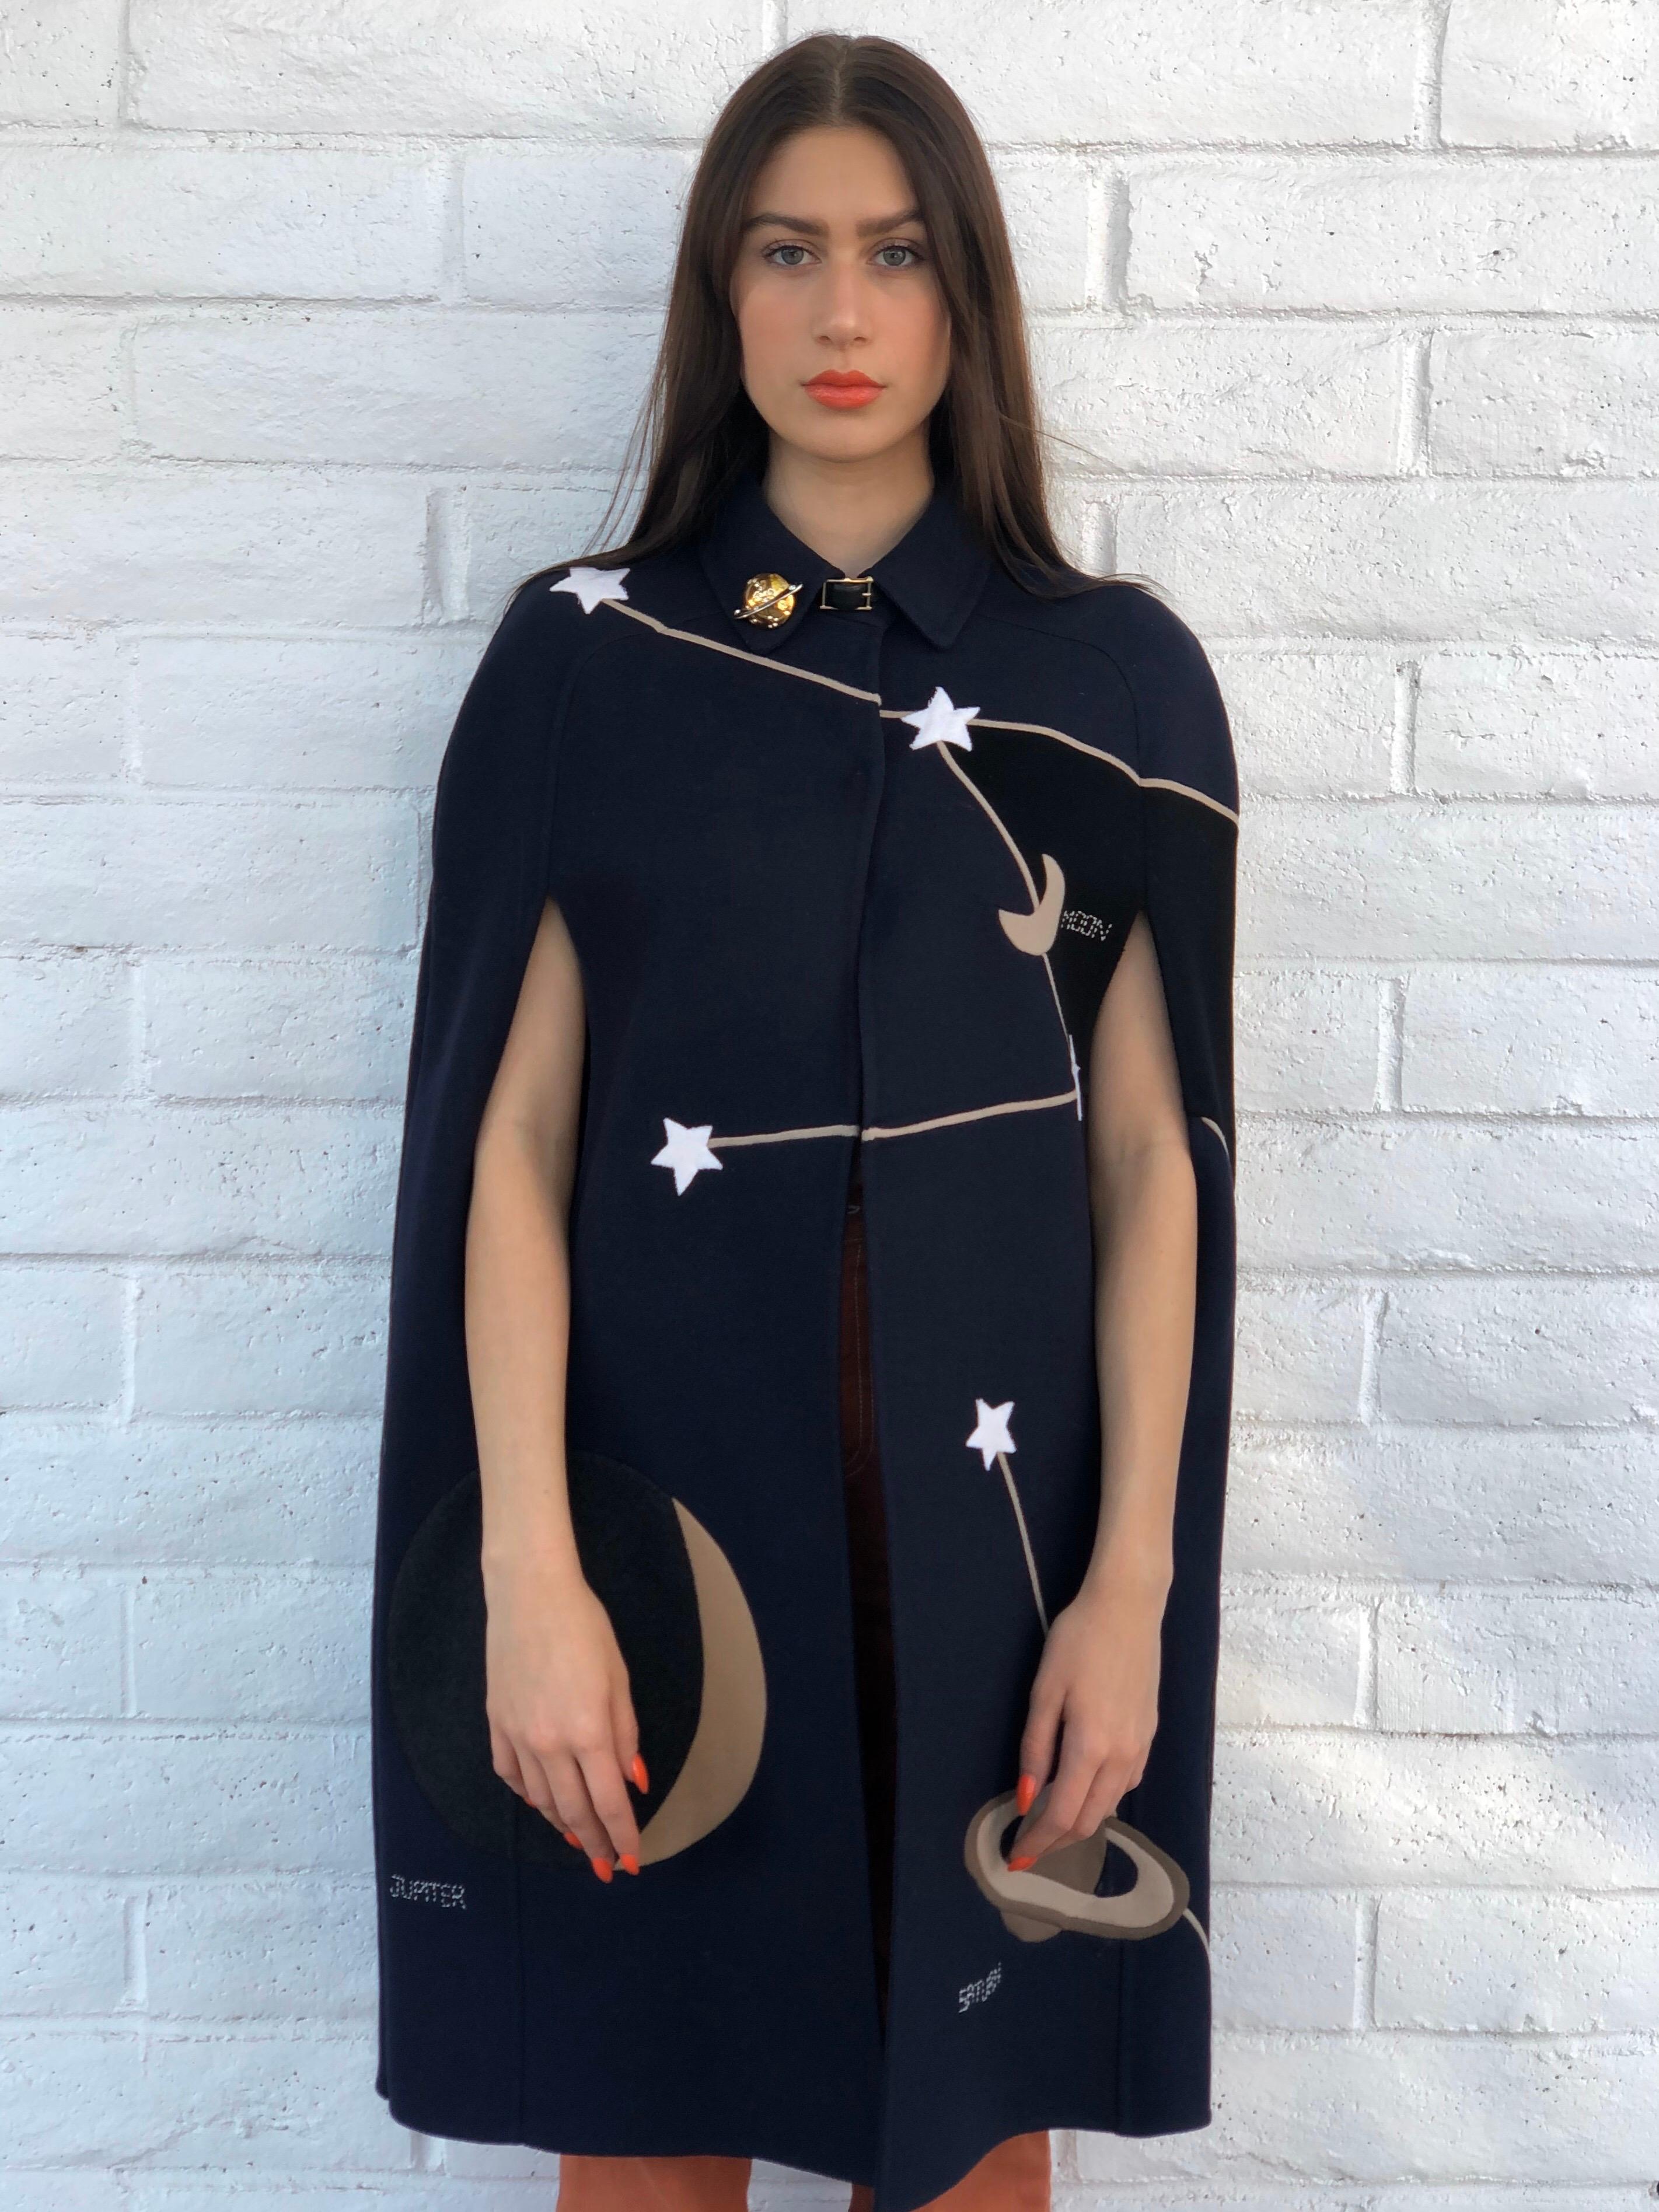 Make all your wishes come true with this Valentino cape! Circa 2015 from their pre-fall collection, this cape is made of deep navy blue wool and features an amazing constellation pattern, hidden front fastenings and a mini leather belt closure at